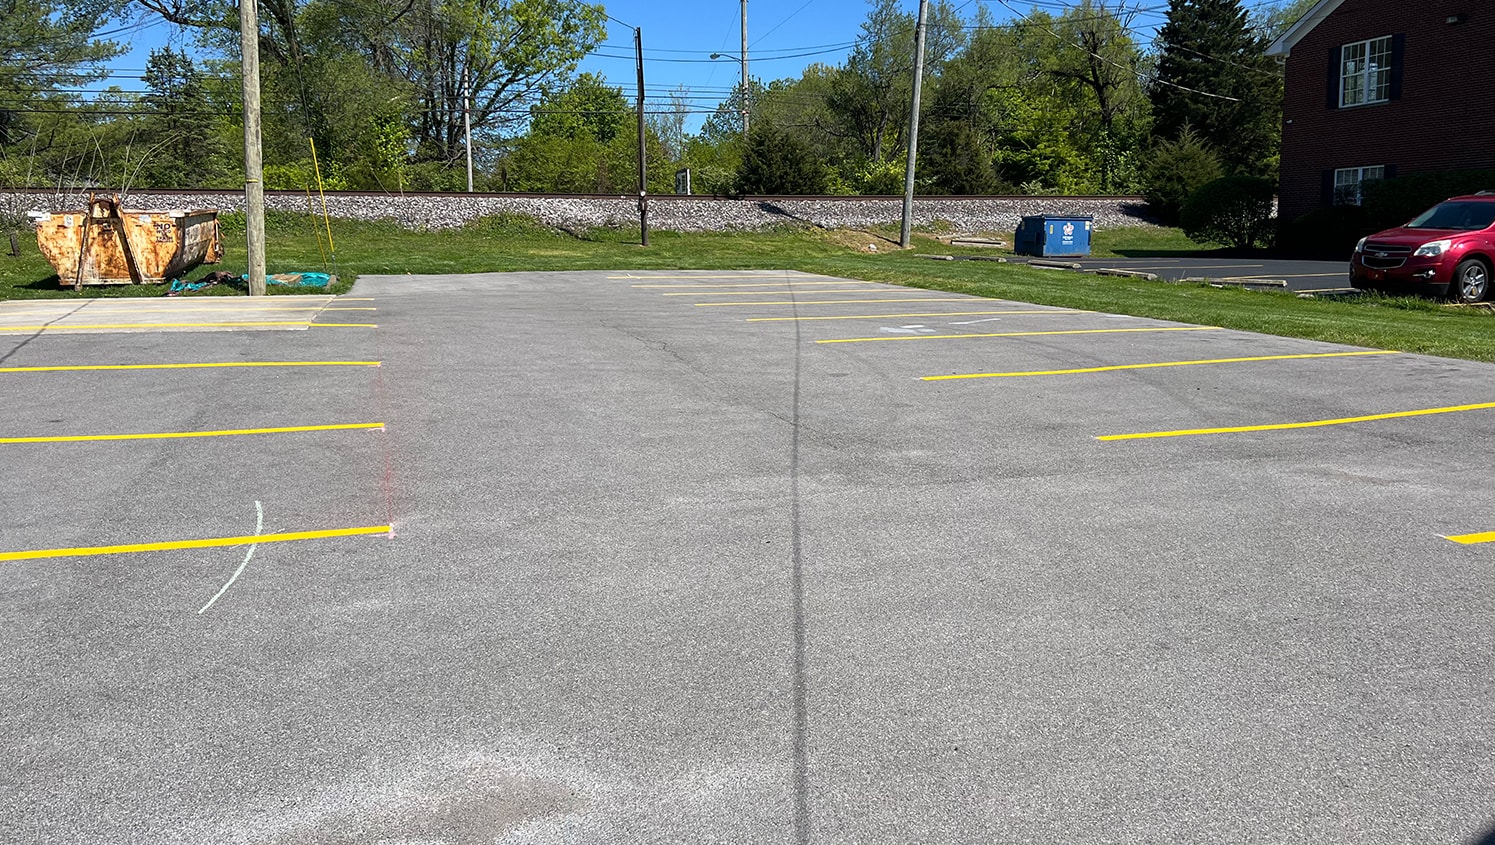 146 chiropractic parking lot after fresh painted lines